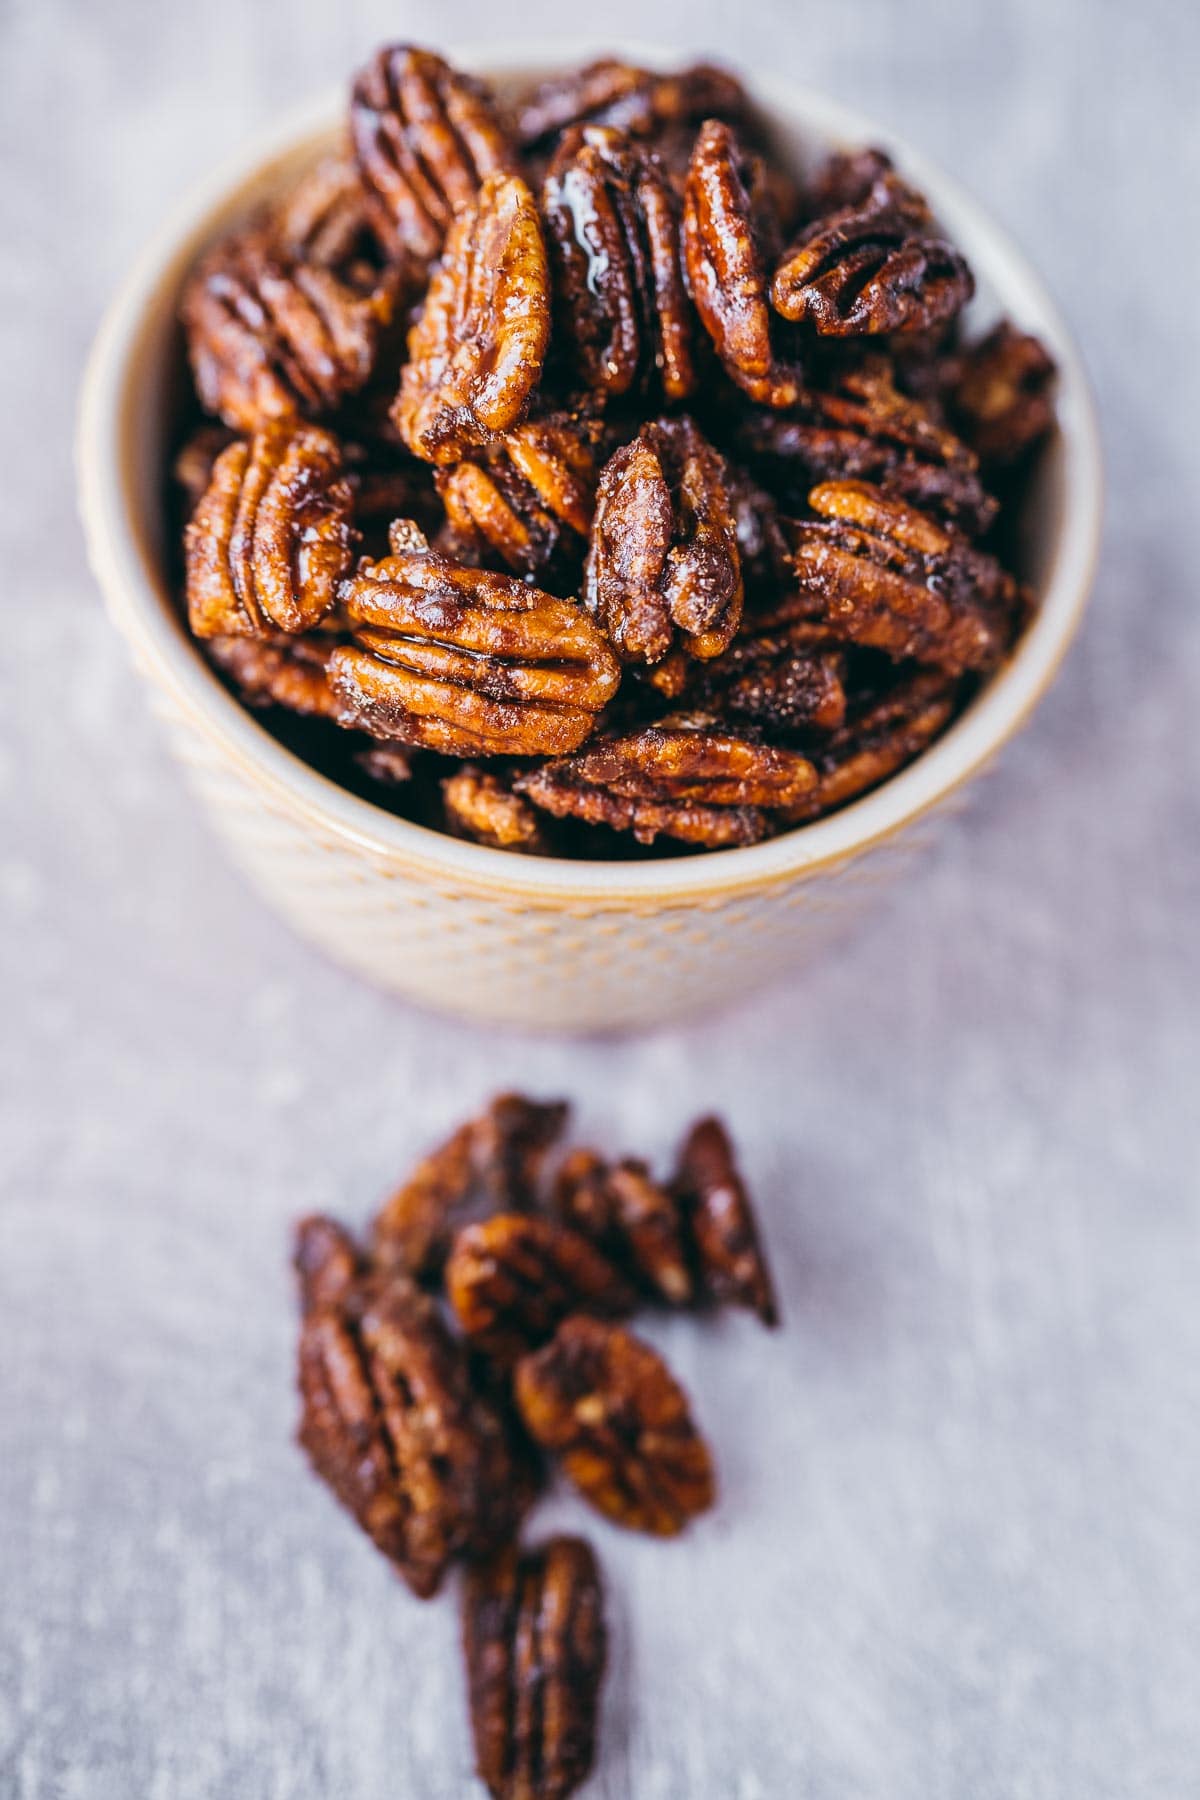 Spicy candied pecans resting in a small ceramic bowl on a gray tabletop.